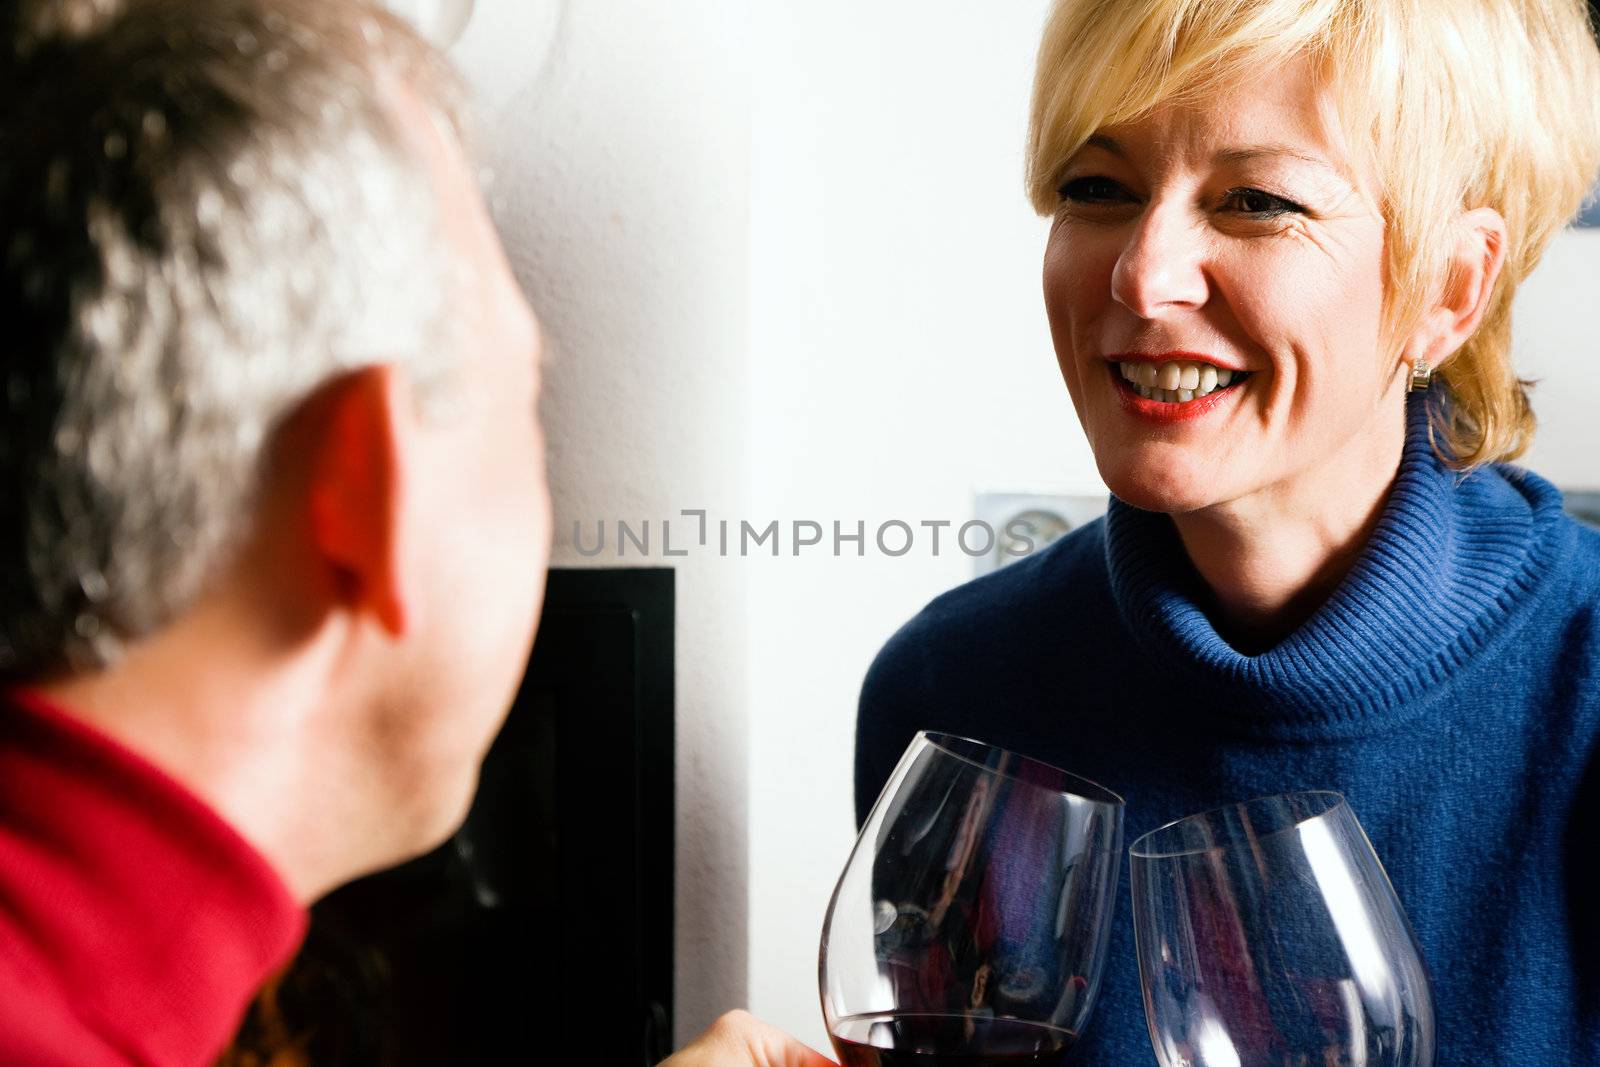 Mature couple having fun clinking glasses with red wine in a romantic setting